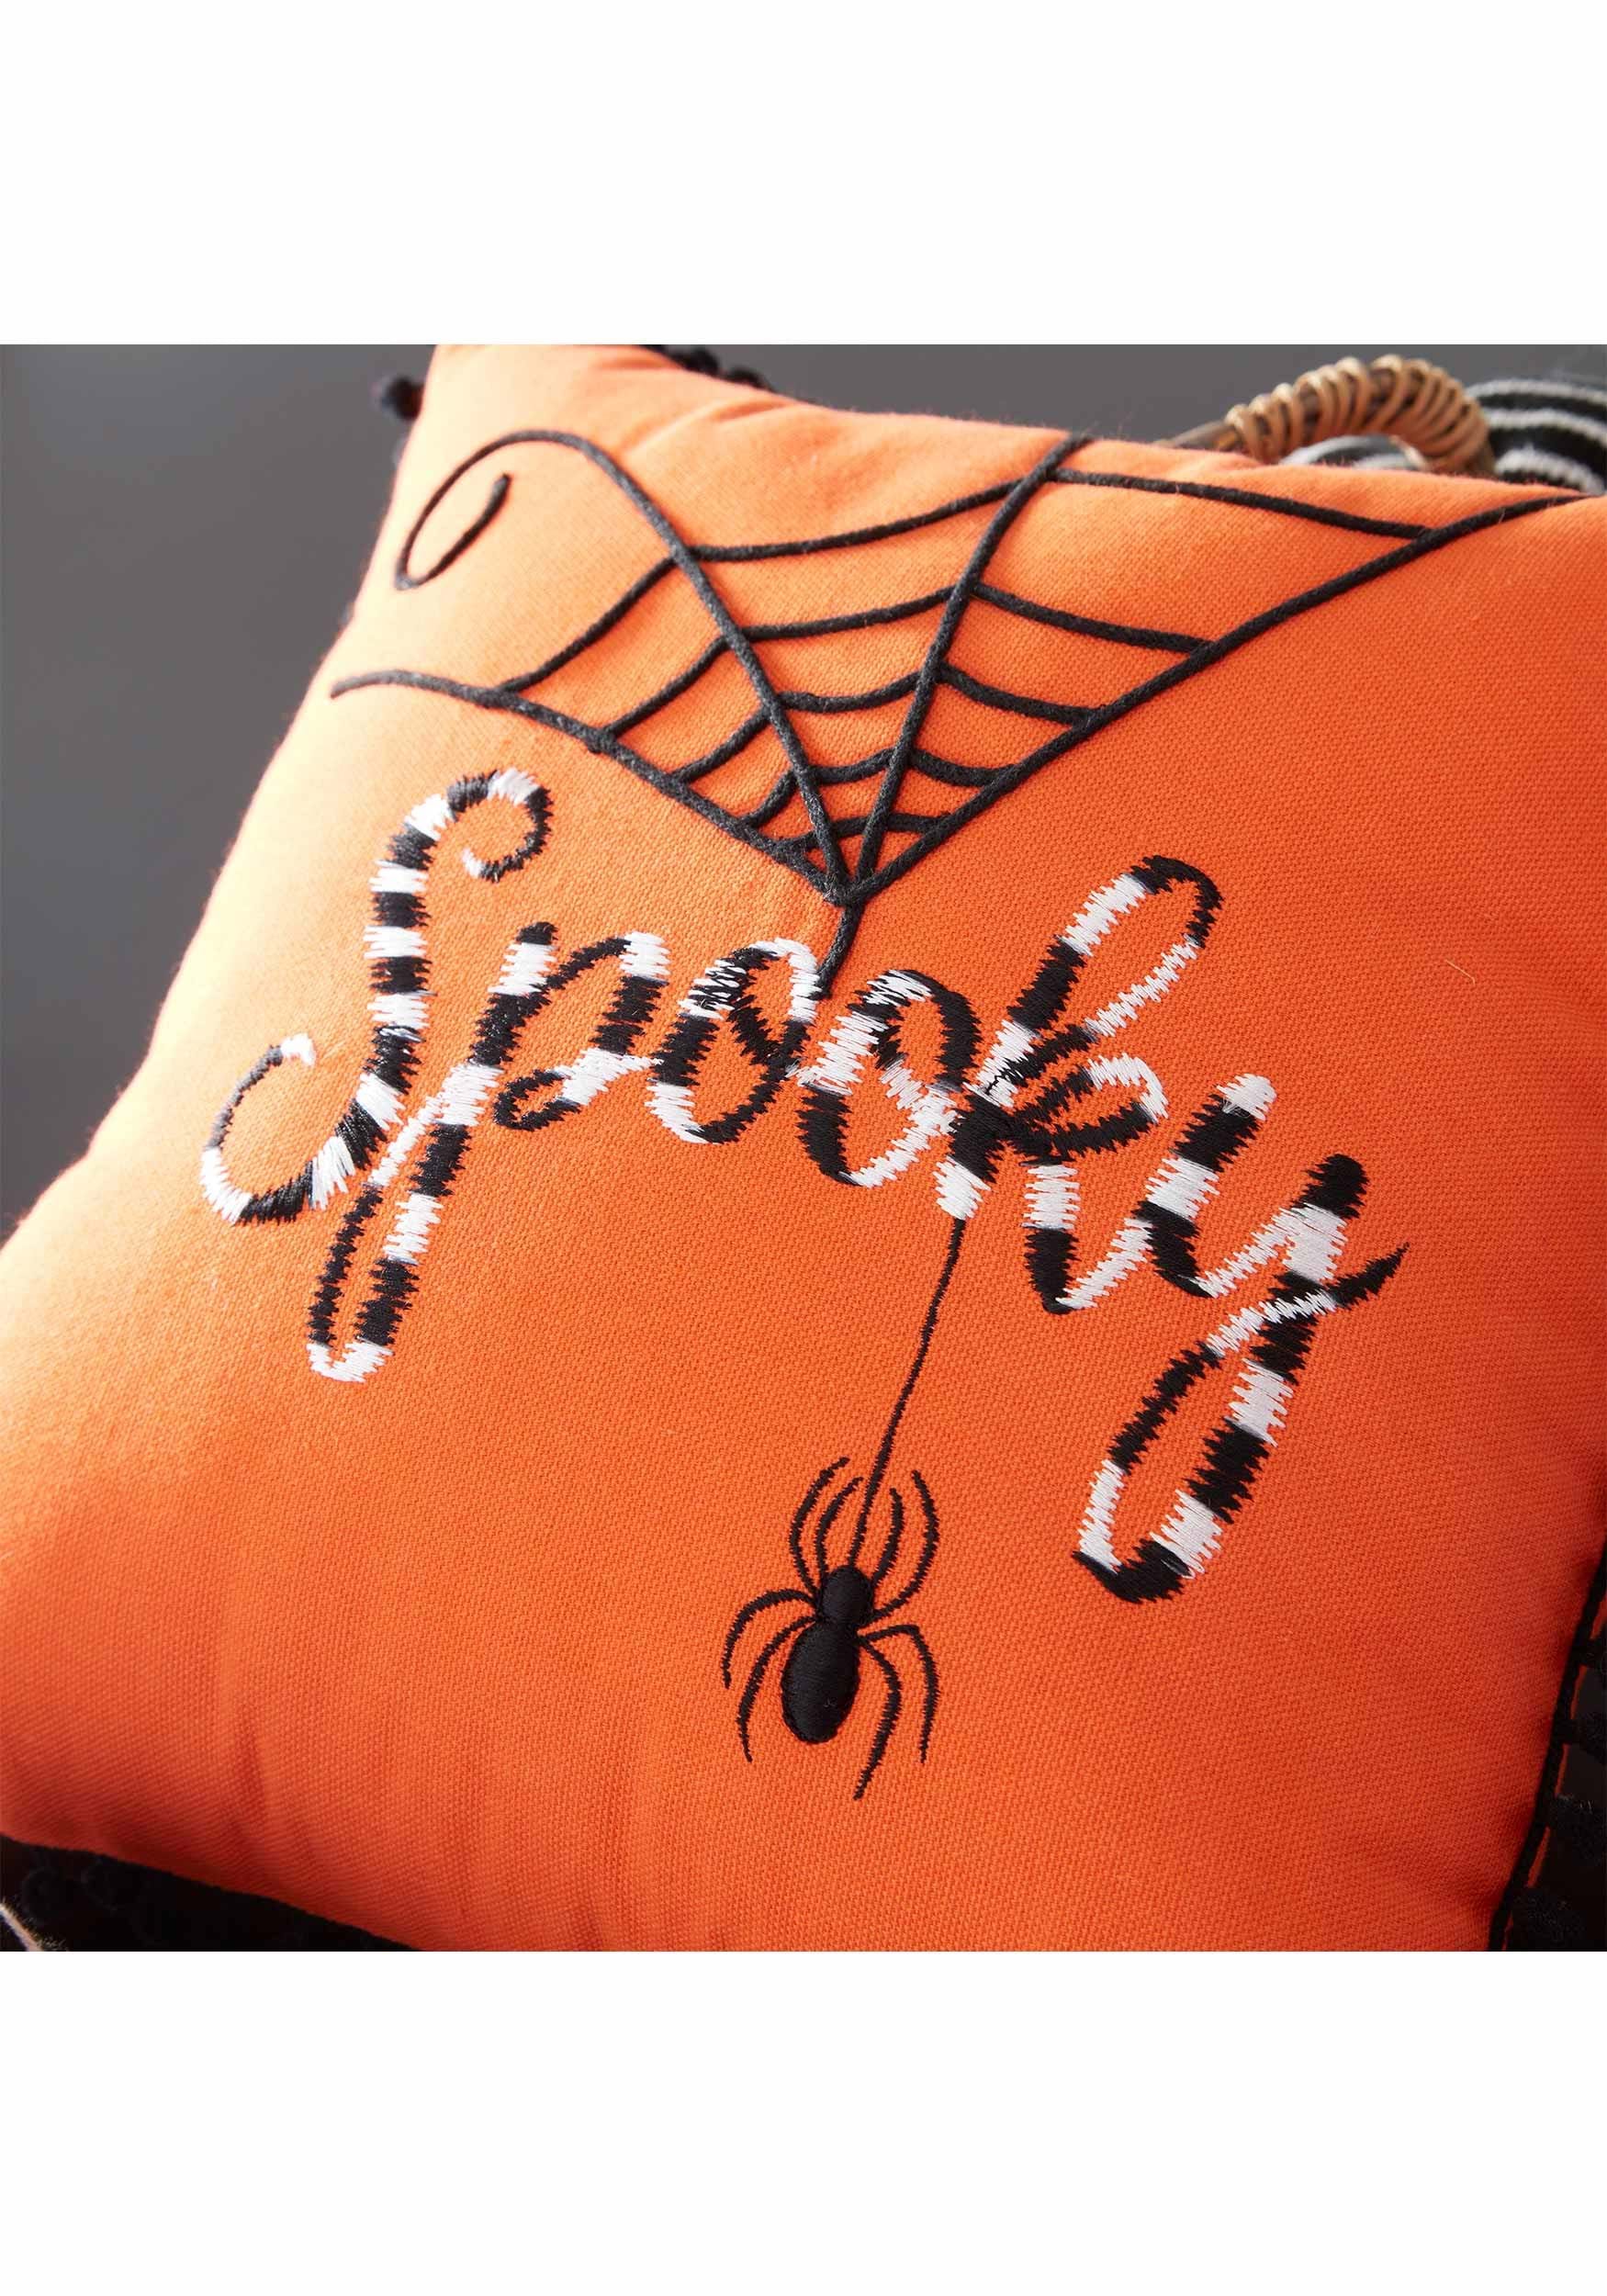 12 Orange Decorative Halloween Pillow With Black And White Embroidery